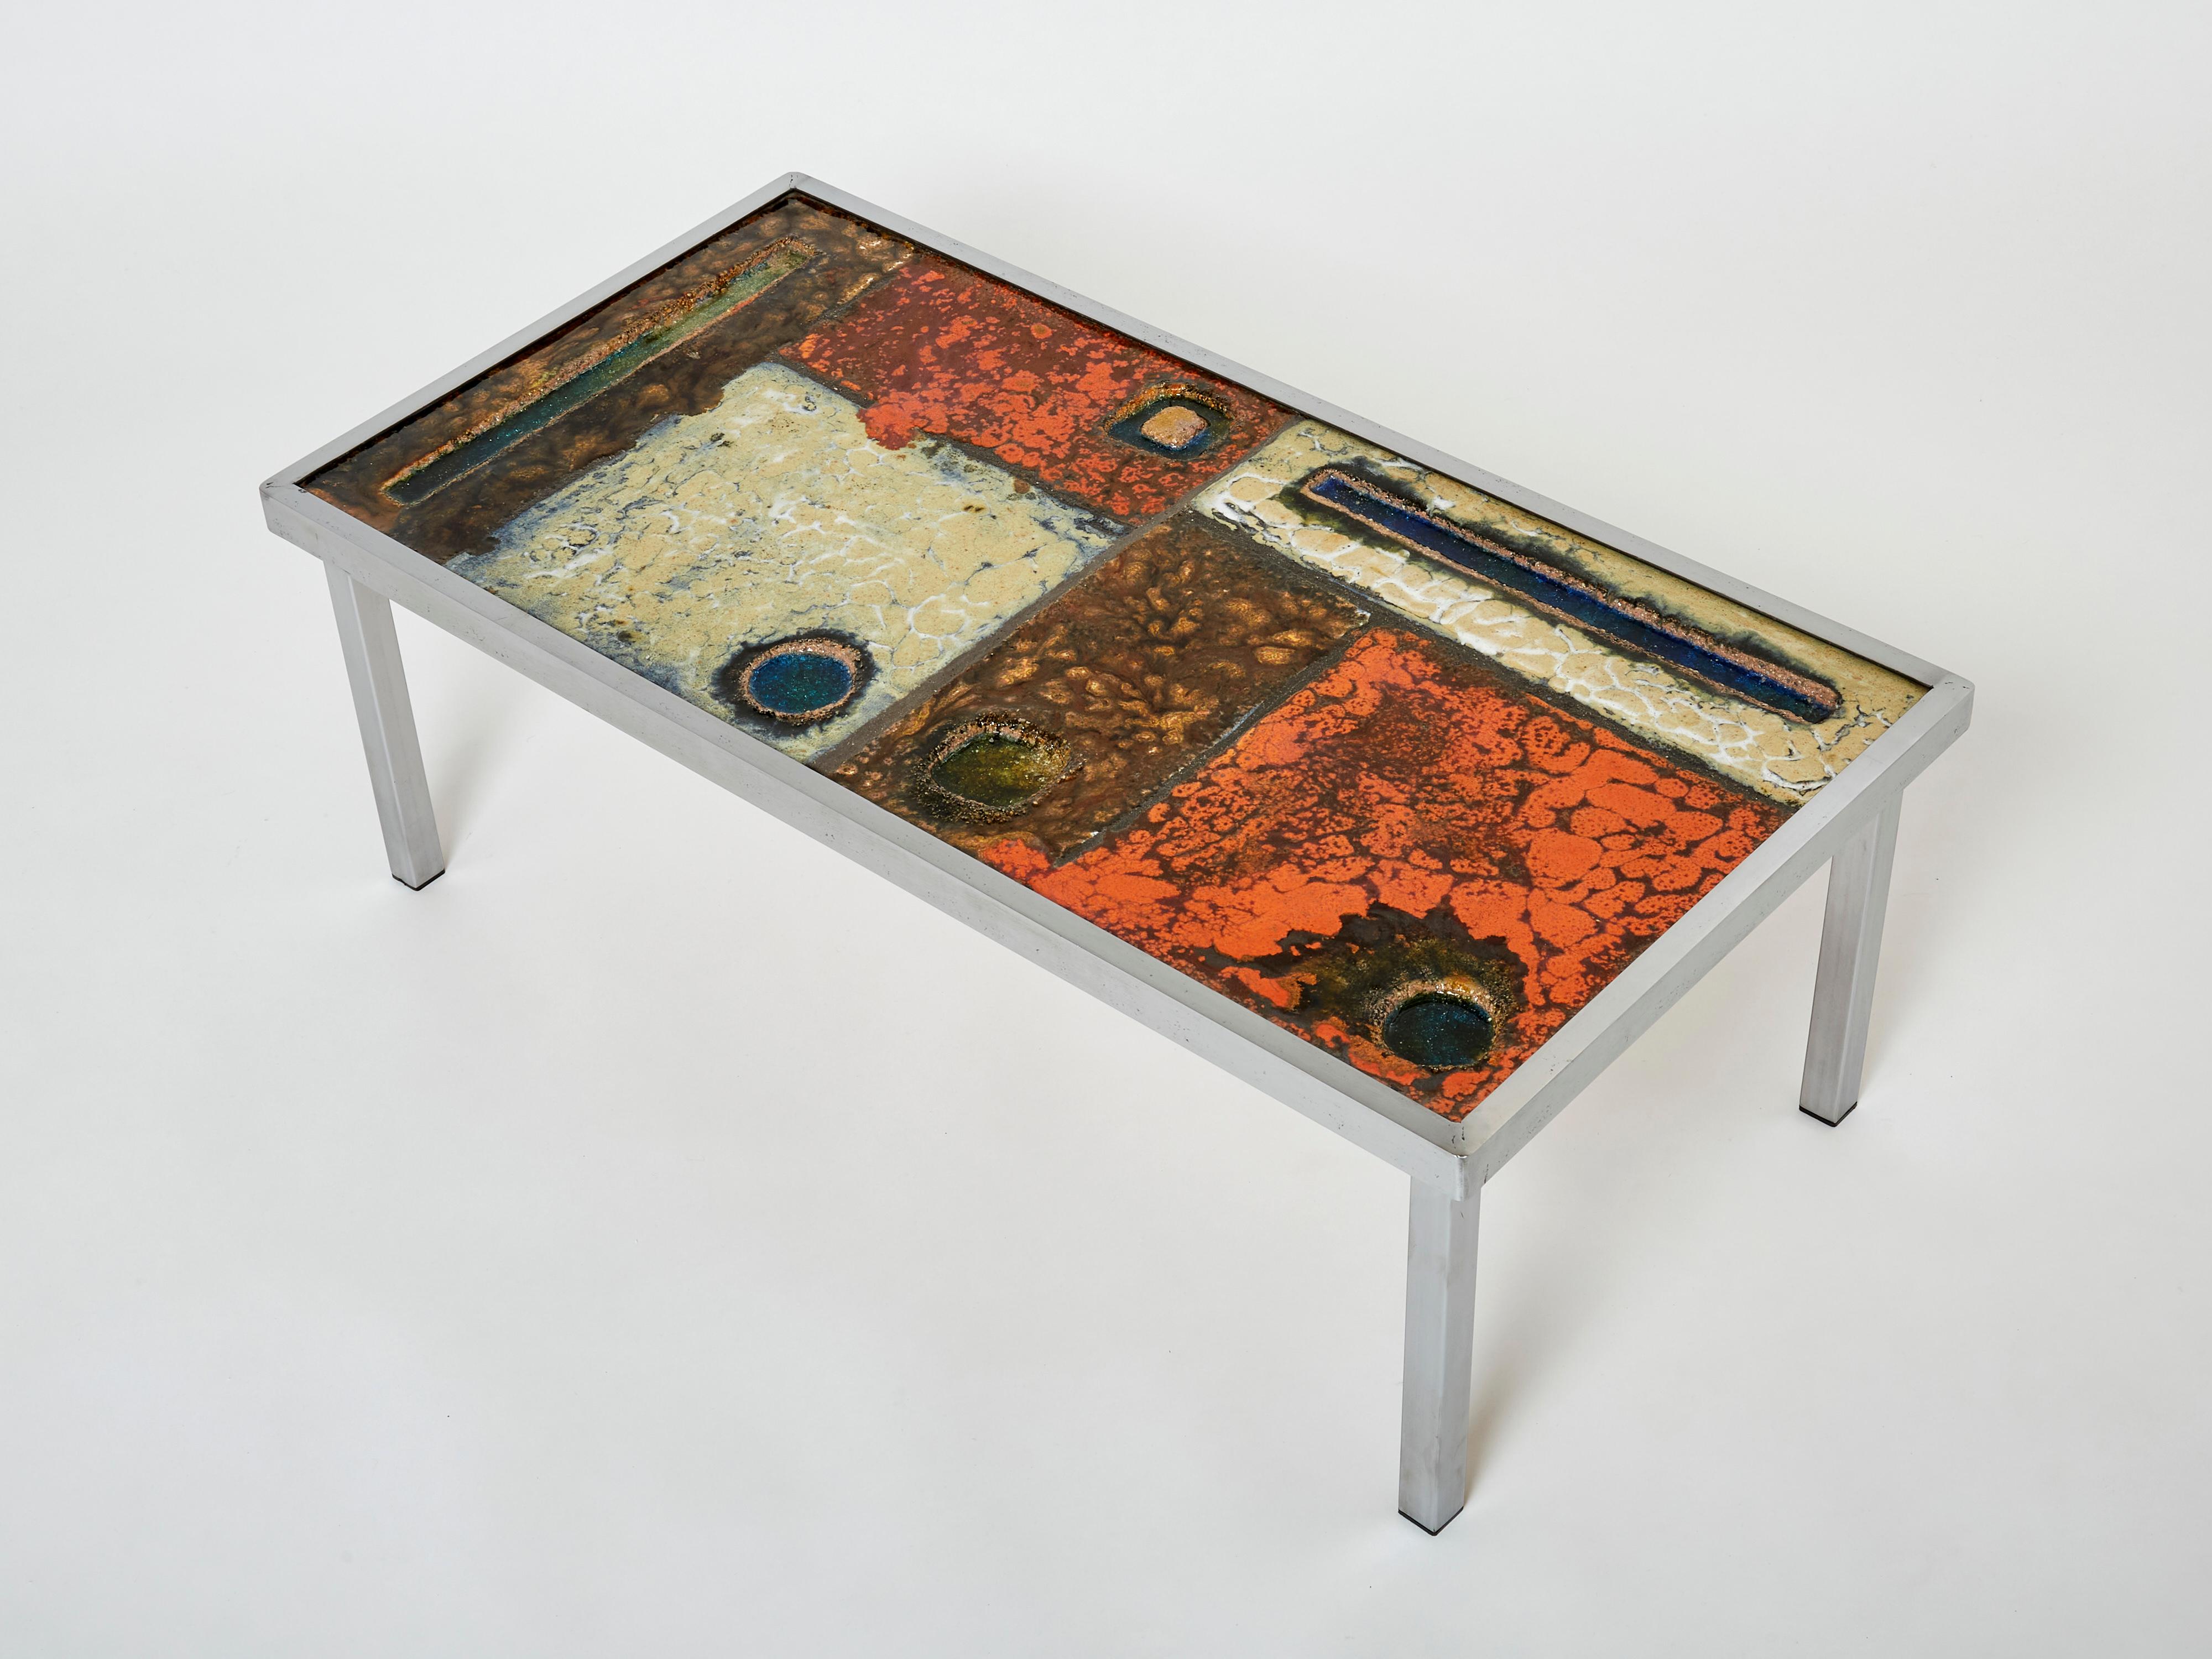 Robert and Jean Cloutier were ceramicists who viewed their work as art, with functionality as perhaps a secondary purpose. The ceramic table surface made in enamelled lava stone, with glass inclusions, explodes with warm colors. Organic-feeling